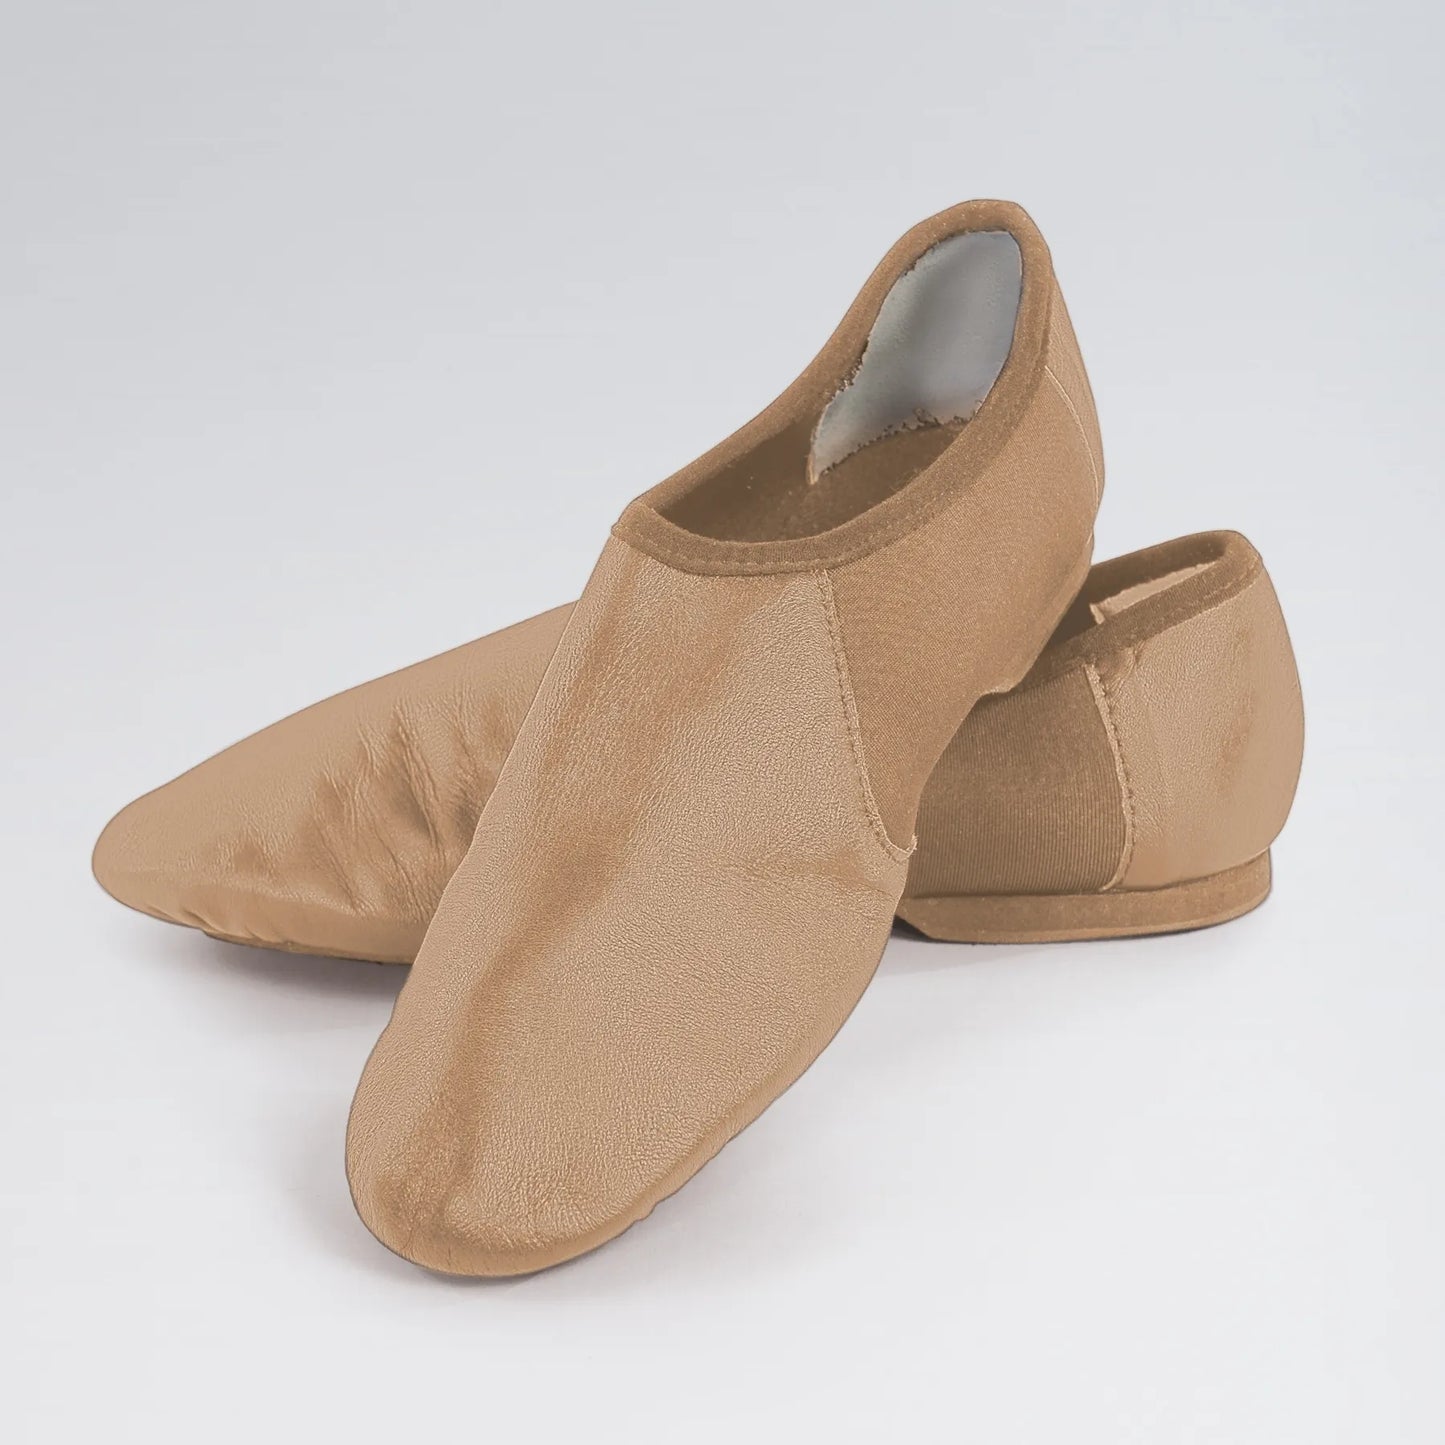 1st Position Split Sole Jazz Shoe with Suede Sole Tan  SALE 30% OFF!! PRICES ALTERED